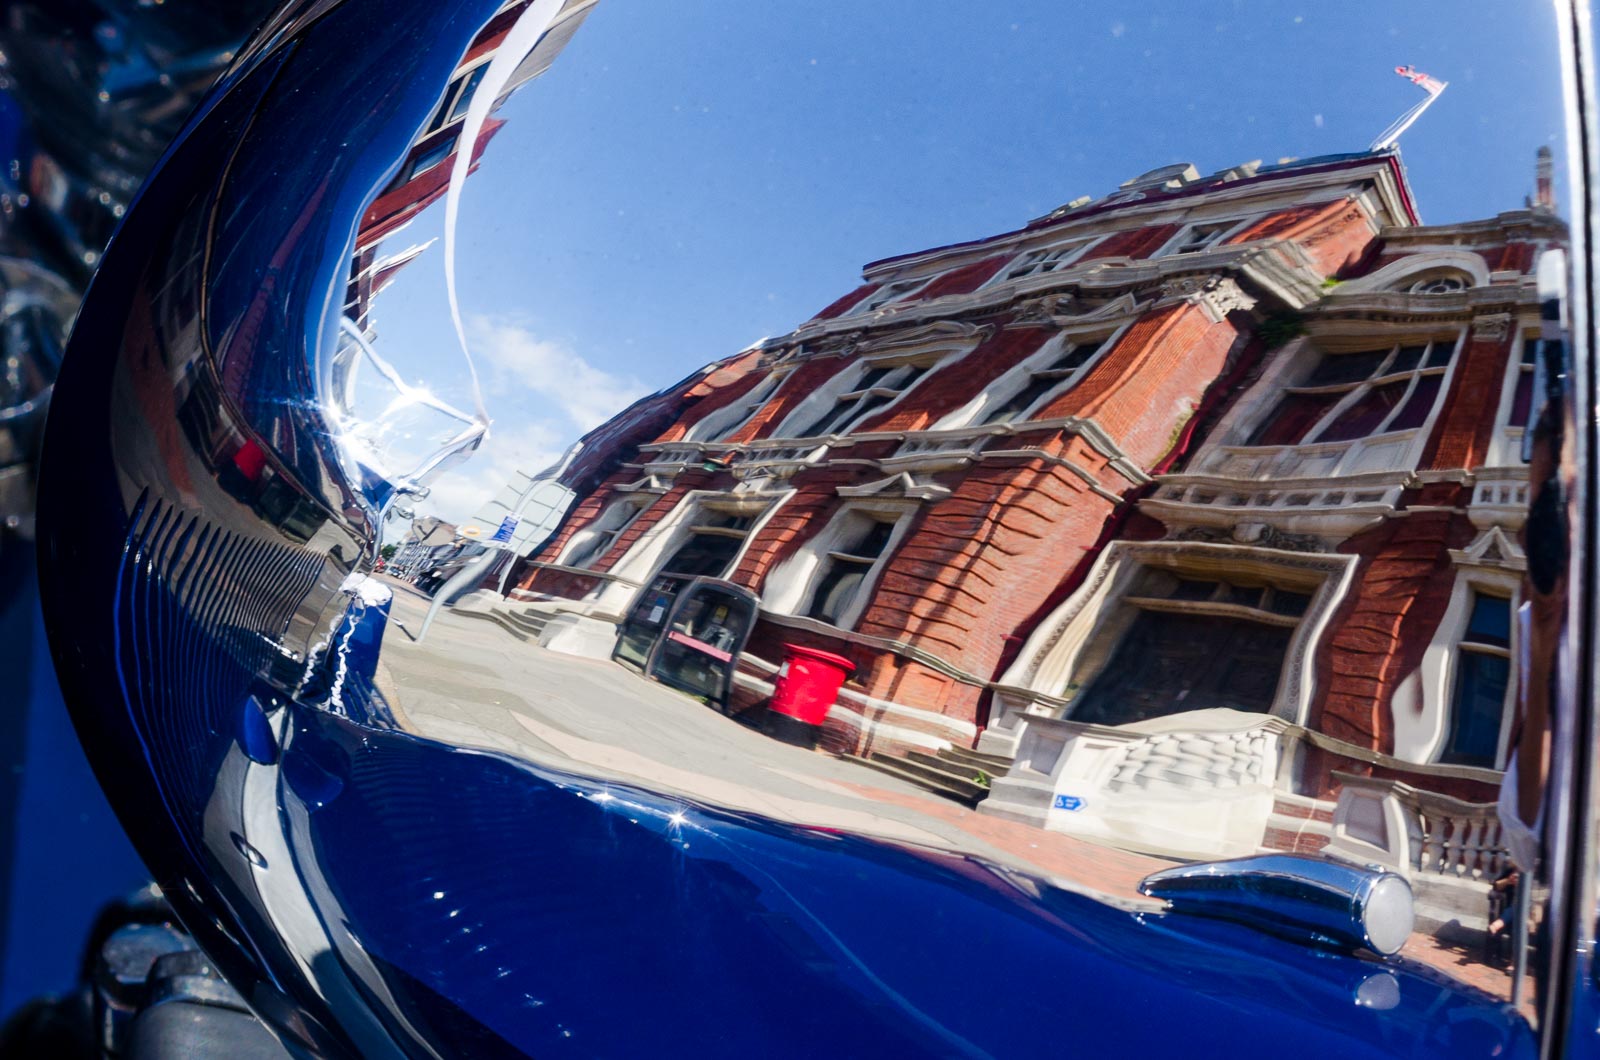 Eastbourne Town Hall is photographed in the reflection of Donna and Andy's Wedding Car.